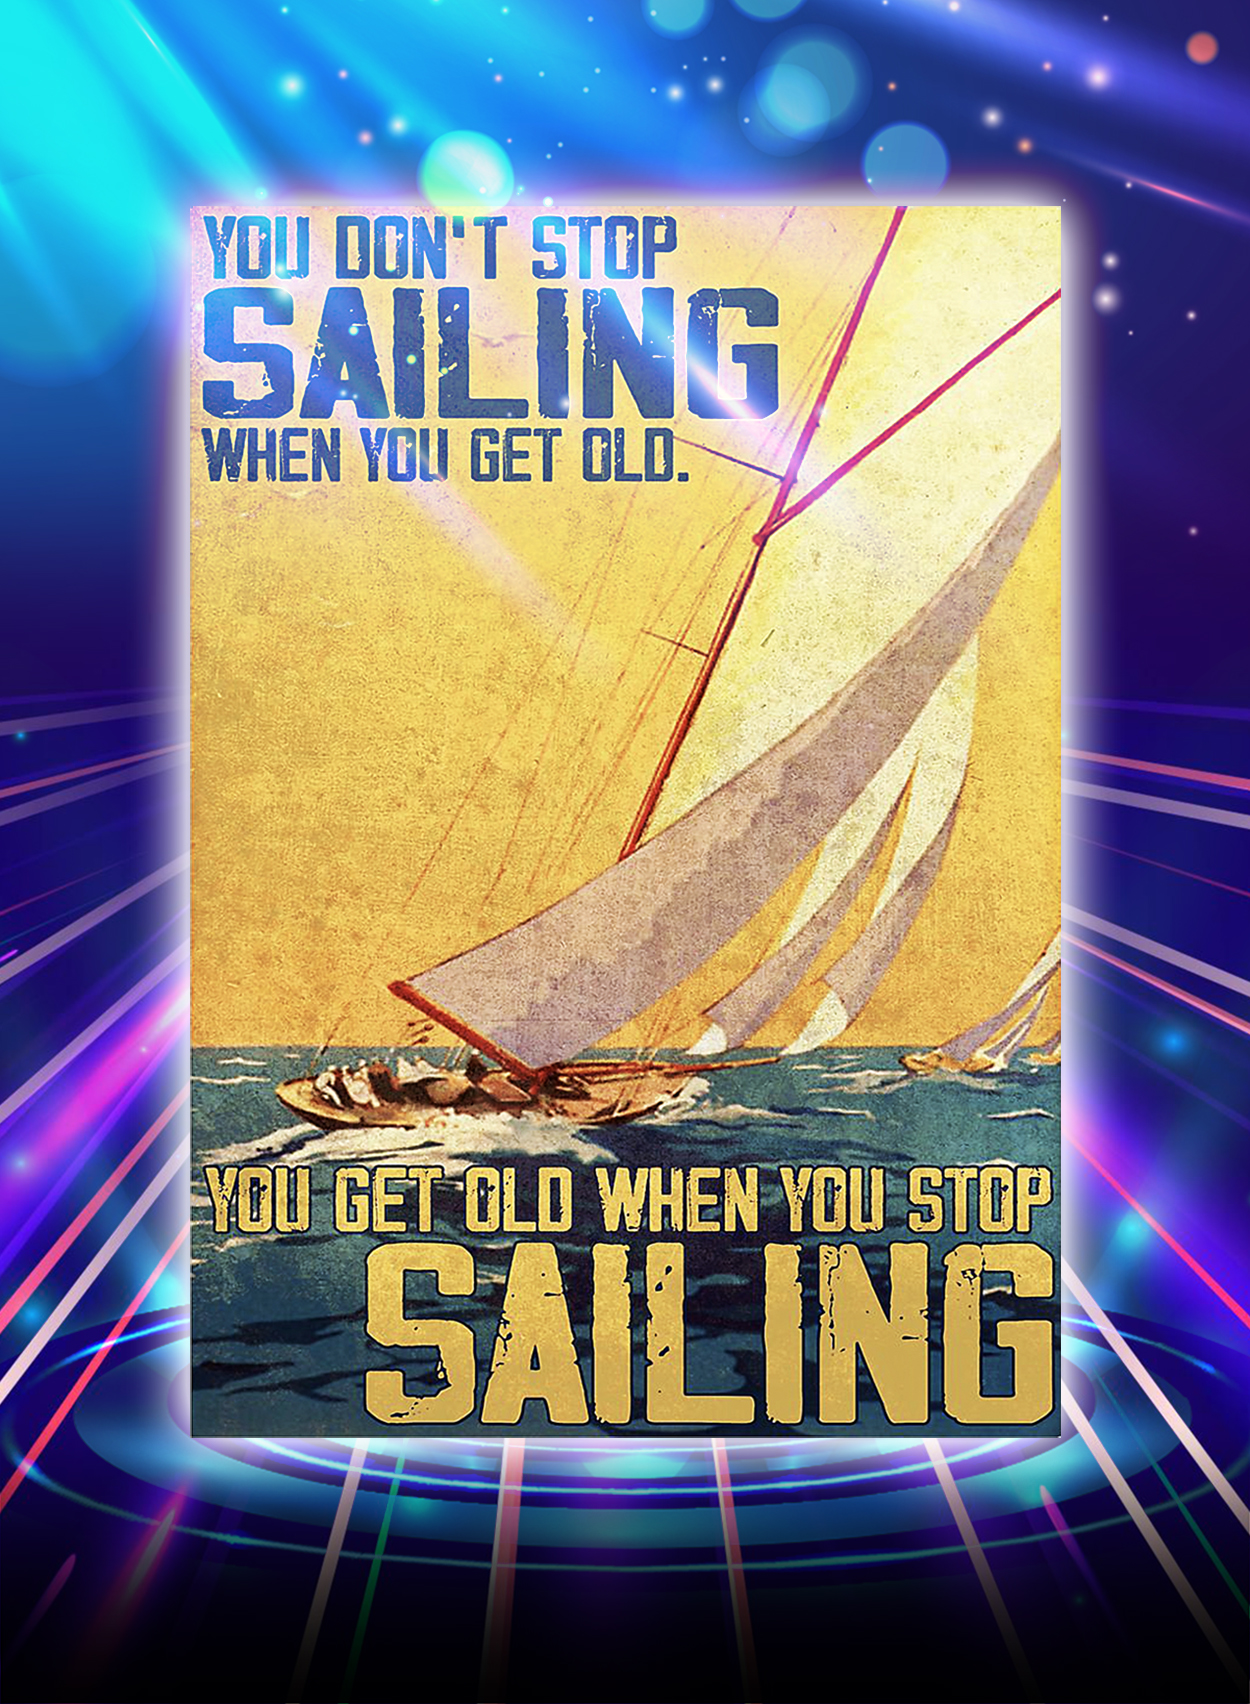 You don't stop sailing when you get old you get old when you stop sailing poster - A2